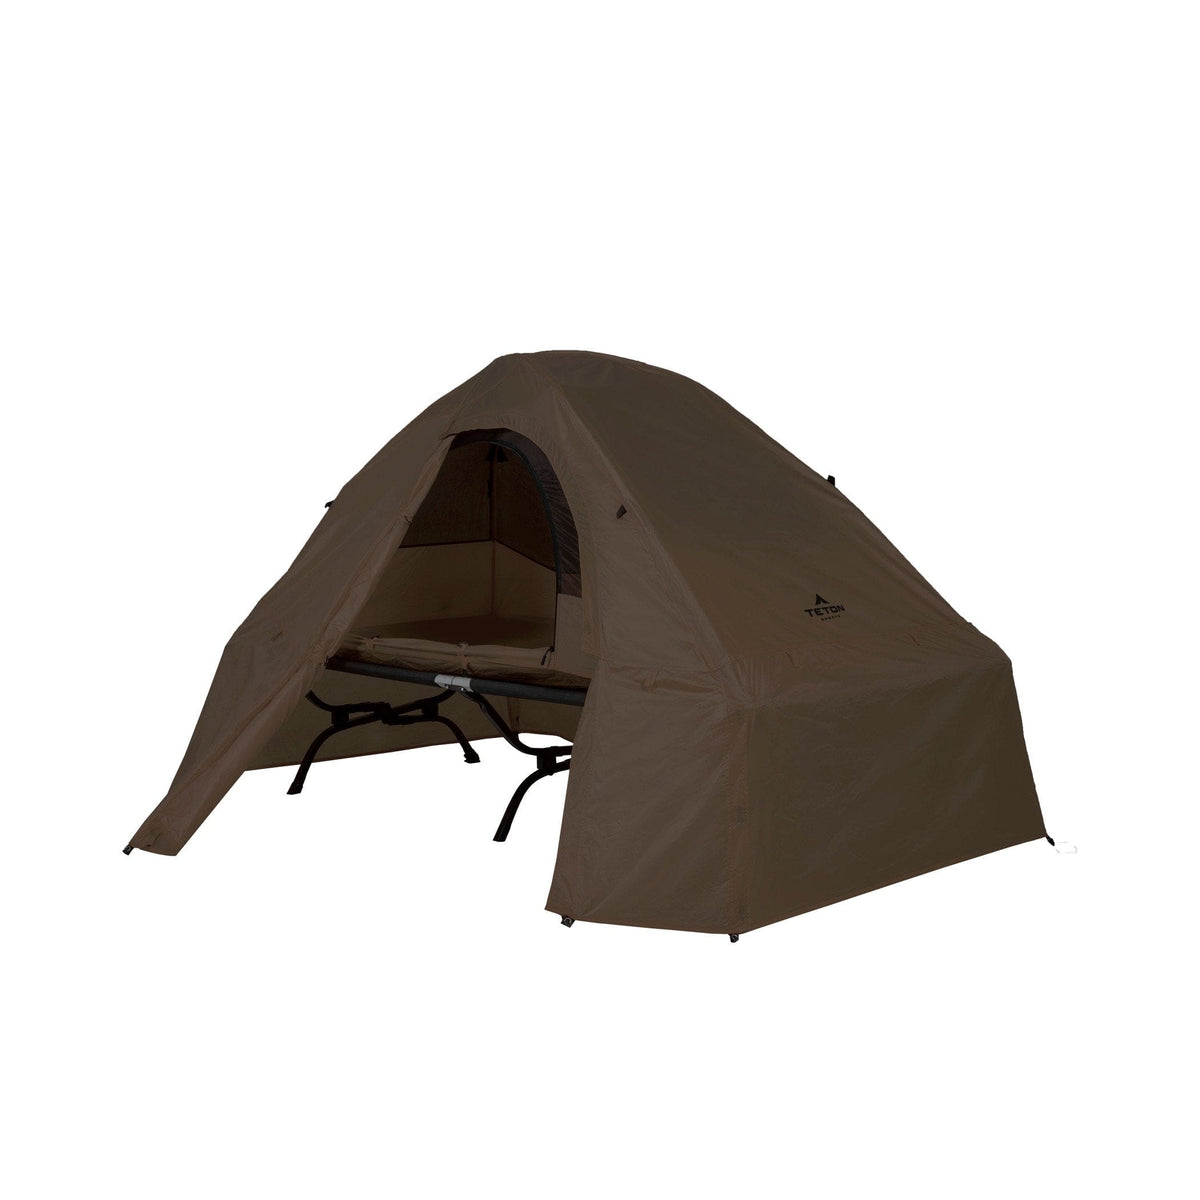 TETON Sports Vista 1 Elite Extended Length Rainfly Tent & Cot Cover Brown 2002BR